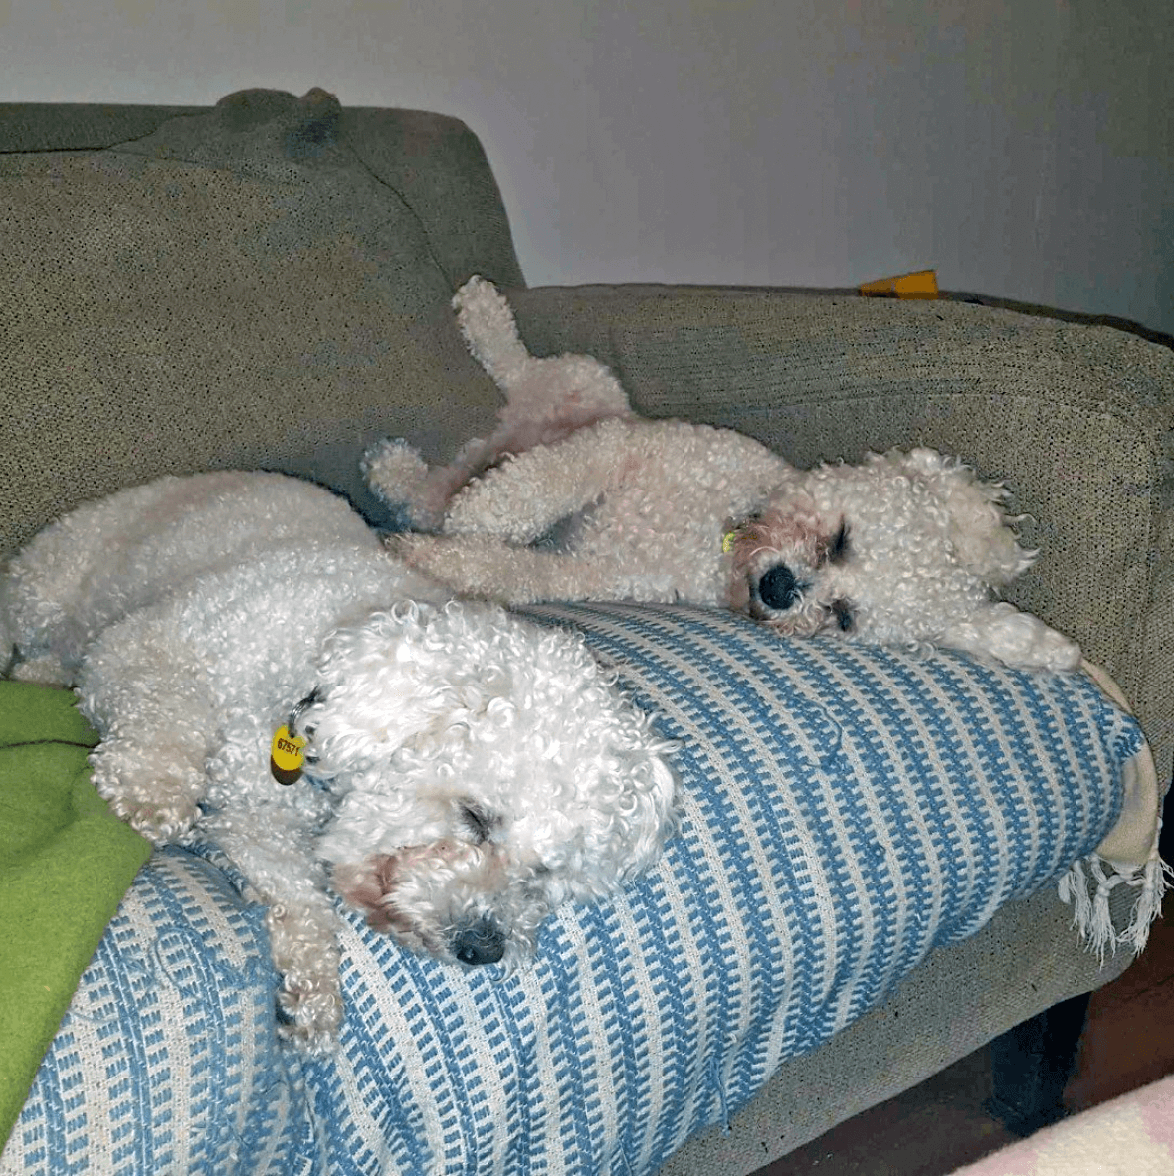 Buzzby and Fang, two fluffy white dogs, sleep on a couch